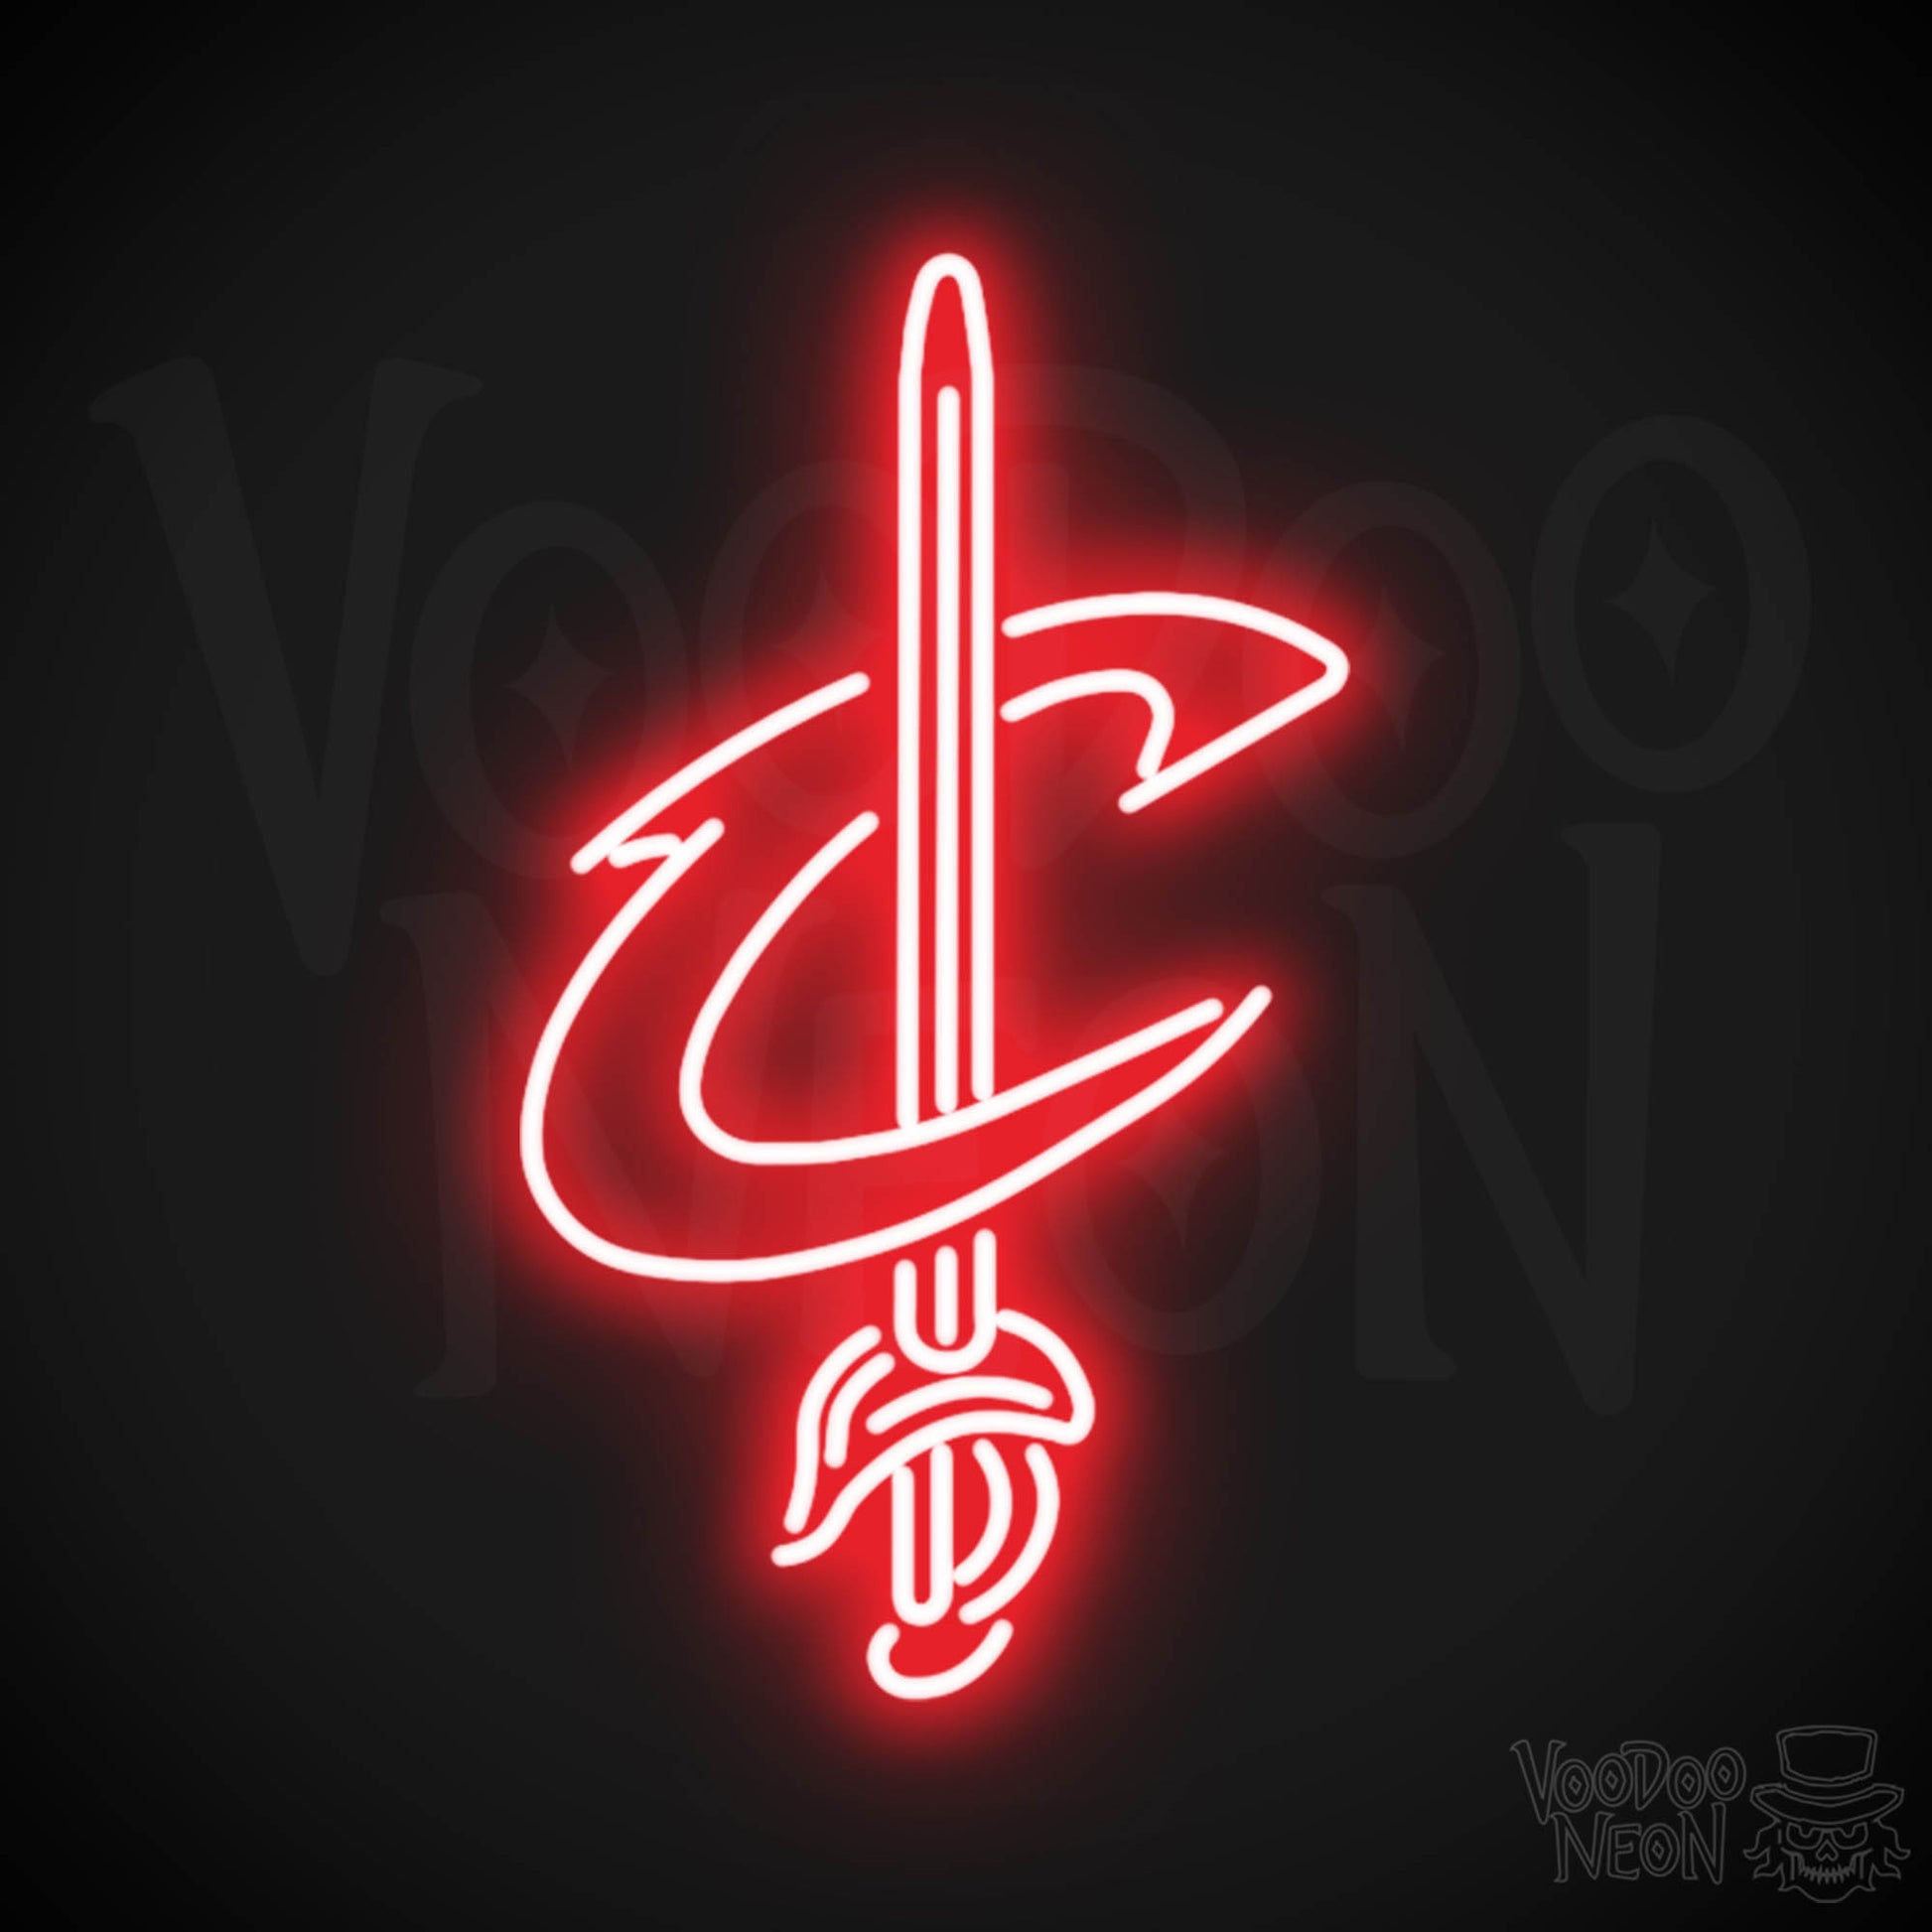 Cleveland Cavaliers Neon Sign - Cleveland Cavaliers Sign - Neon Cavaliers Wall Art - Color Red